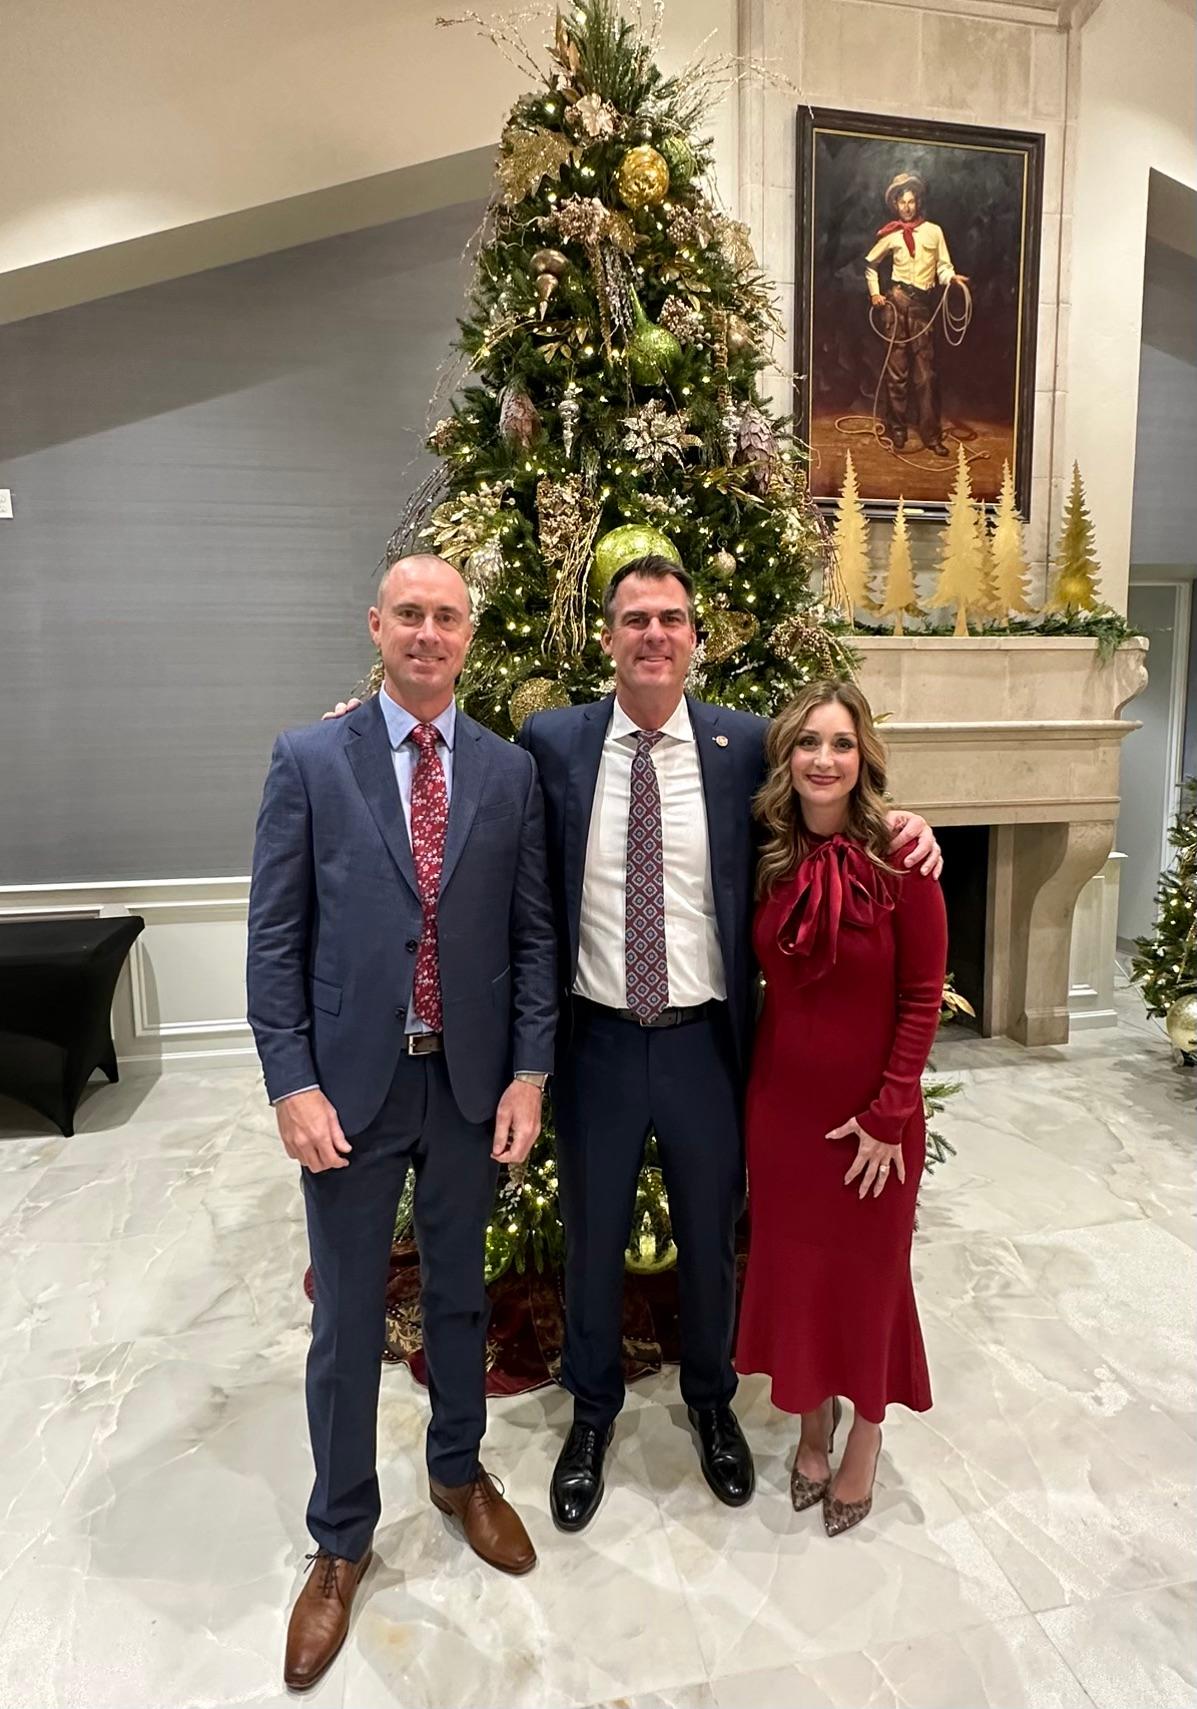 Activist Chris Elton (Left) with Oklahoma governor Kevin Stitt (Center) and First Lady Sarah Stitt (Right) at a Christmas party in Oklahoma City, Oklahoma in December, 2022. (Courtesy of Billboard Chris)